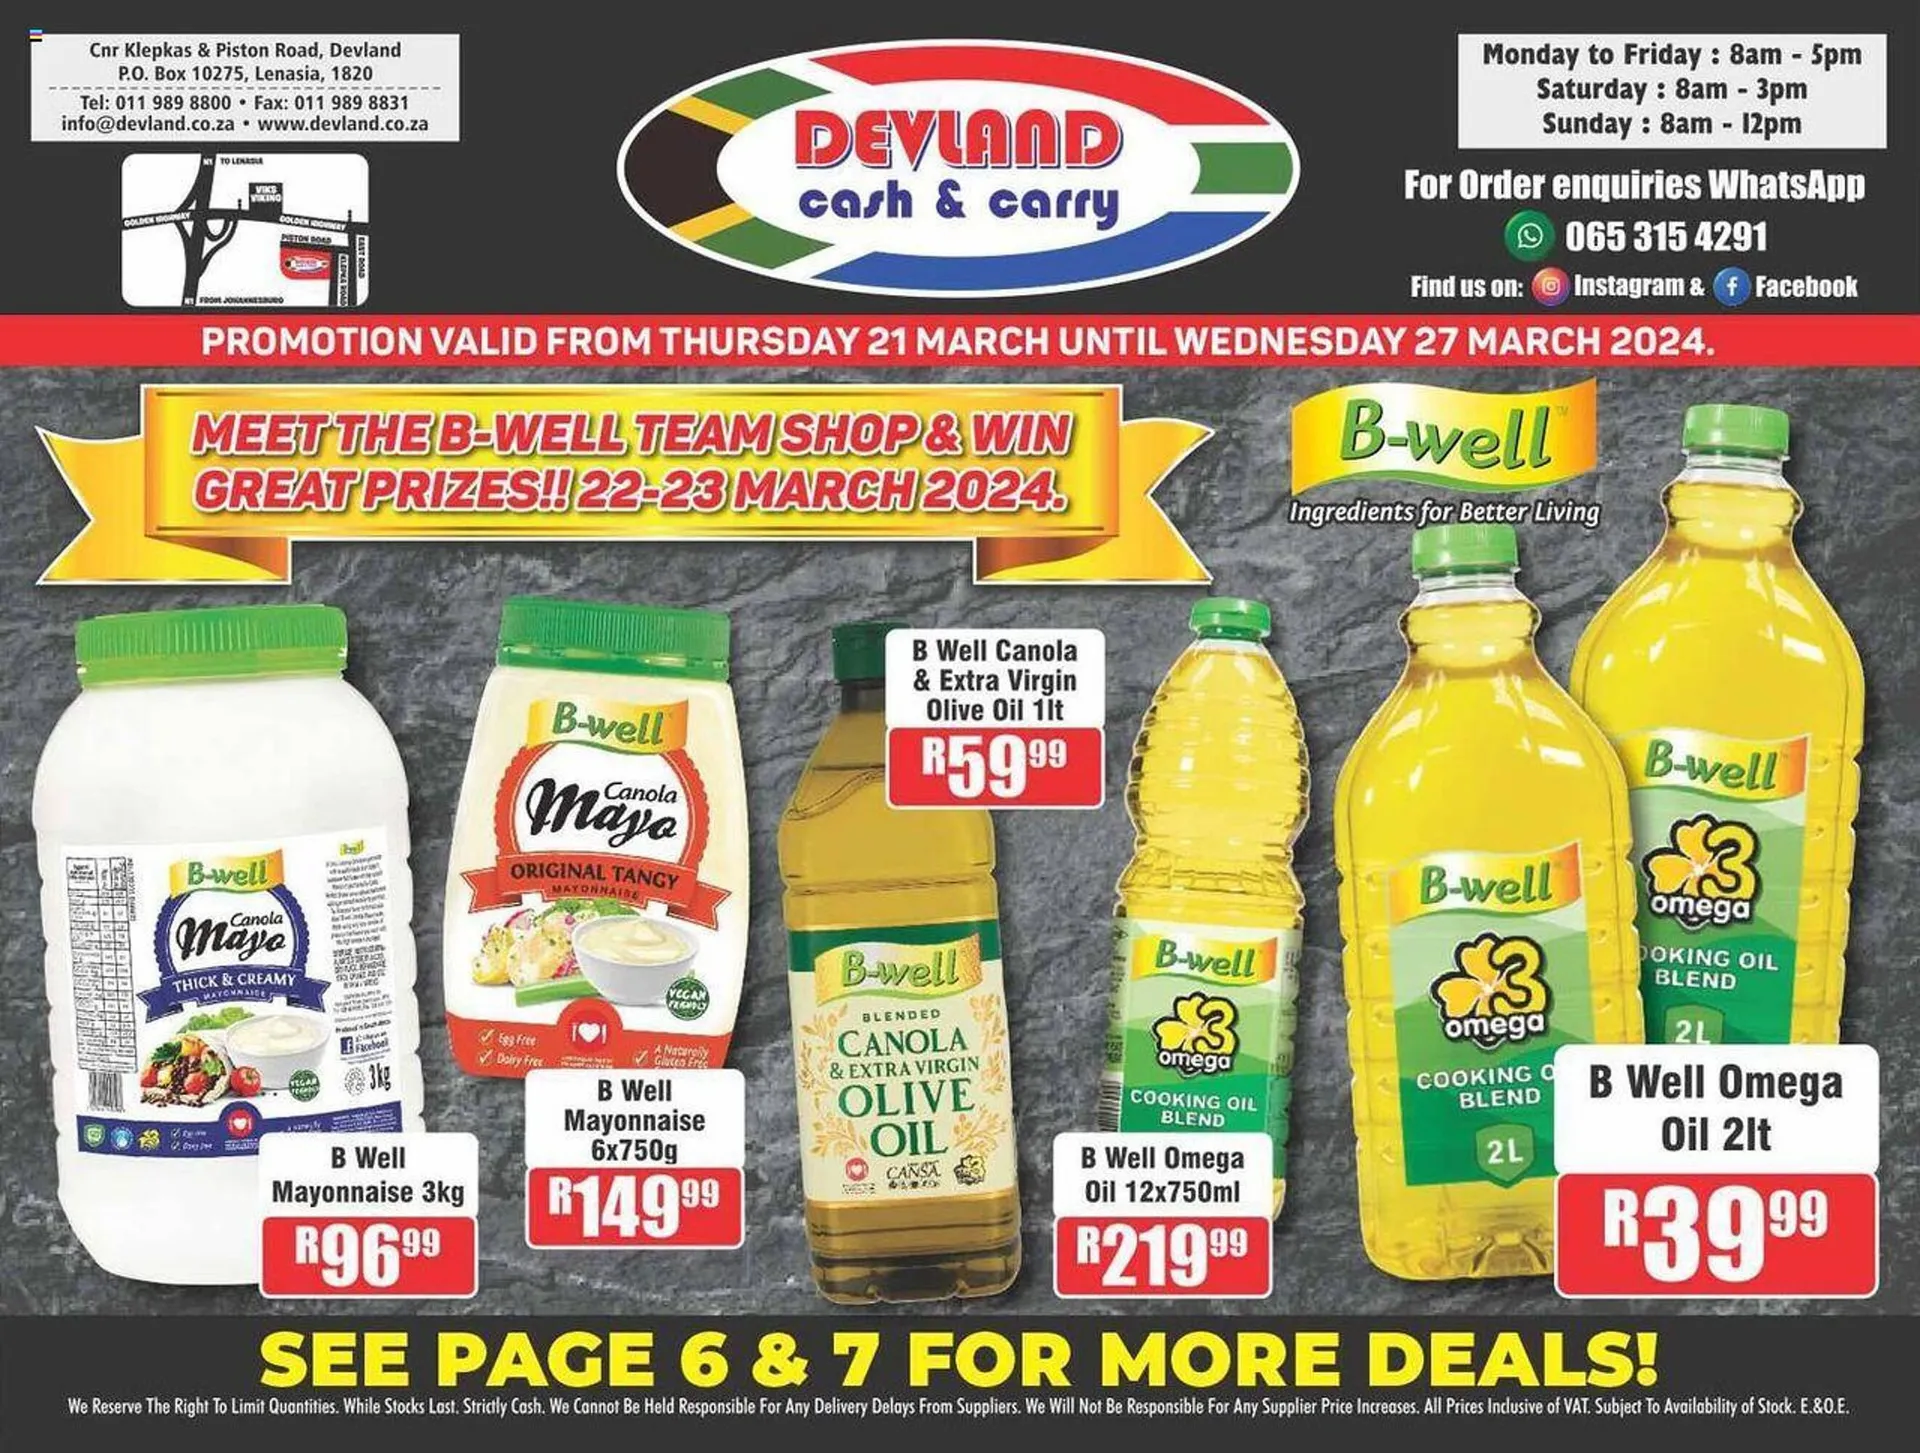 Devland Cash And Carry catalogue - 21 March 27 March 2024